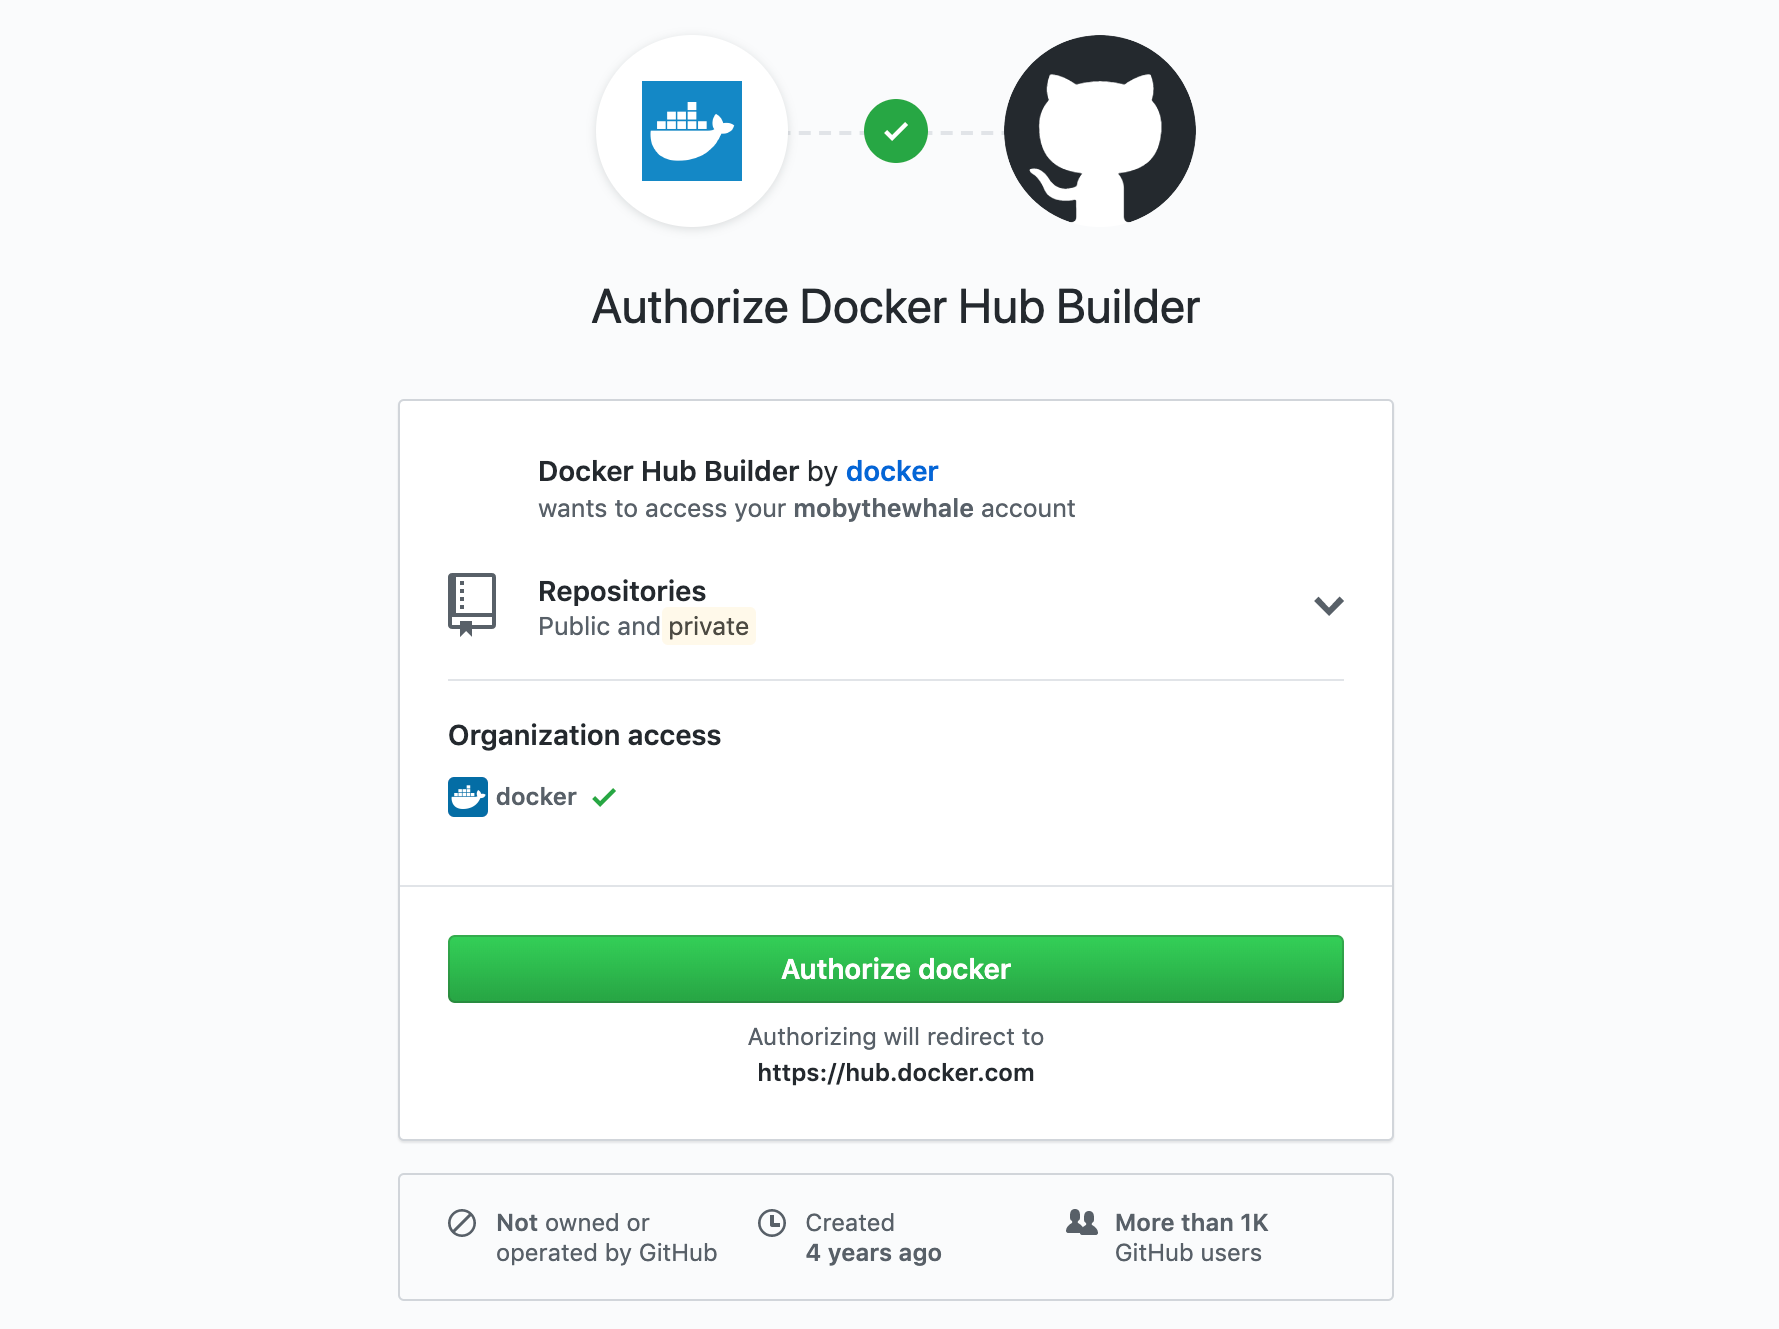 Granting access to GitHub account